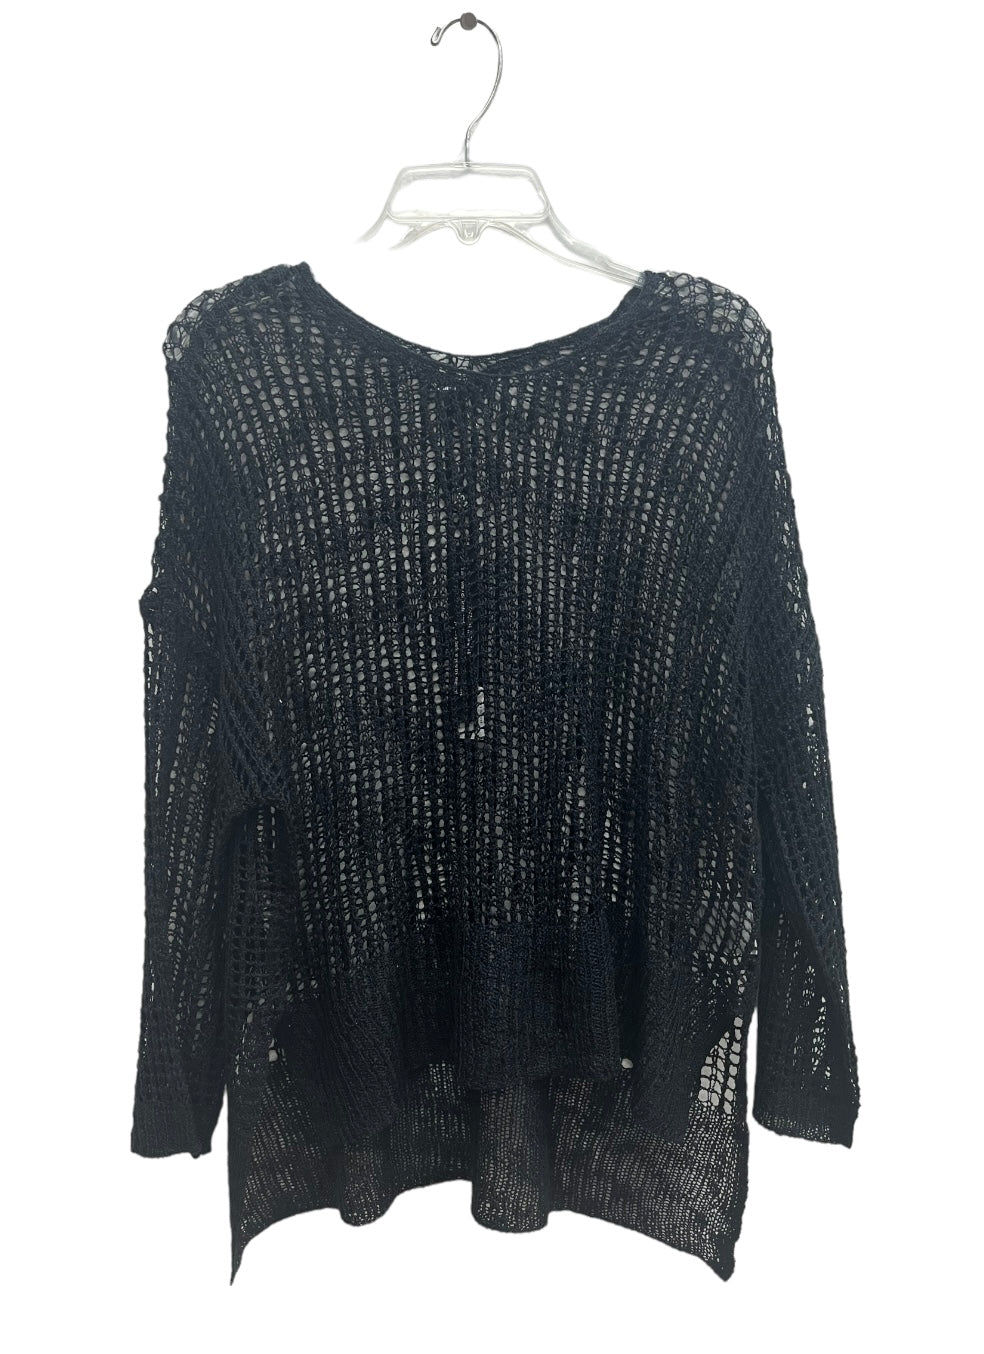 Knit long sleeve top